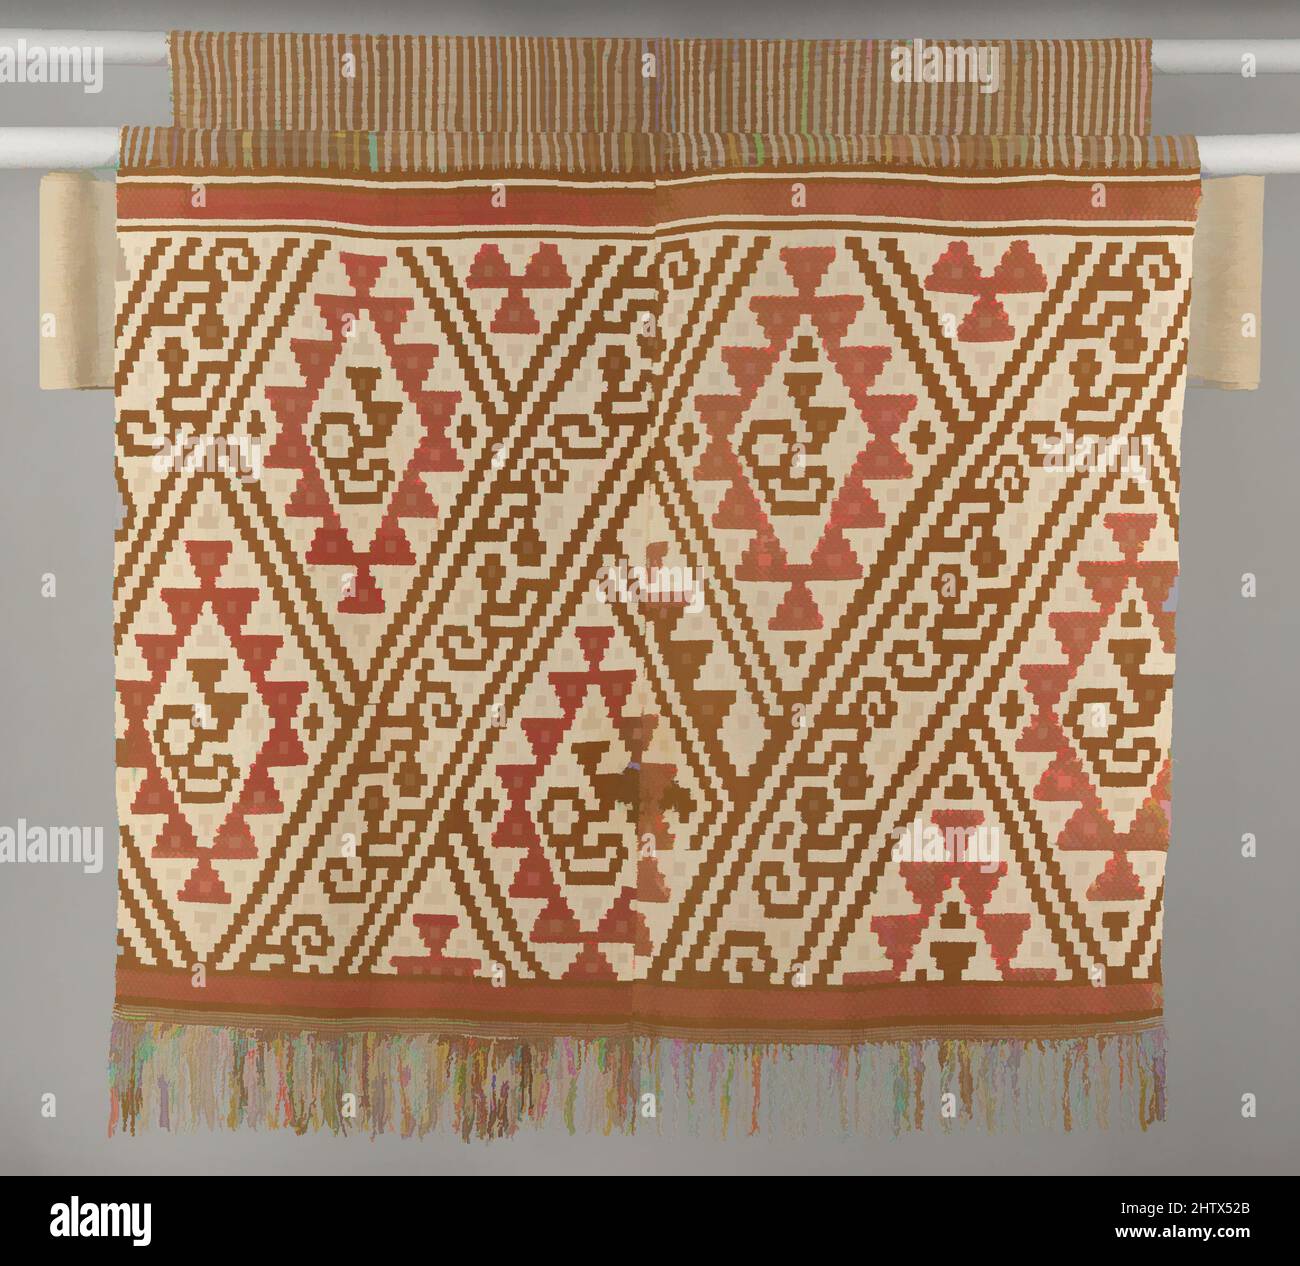 Art inspired by Loincloth, 12th–15th century, Peru, Chimú, Cotton, camelid hair, L. (without tie) 158 x W. 45 in. (401.3 x 114.3 cm), Textiles-Woven, Classic works modernized by Artotop with a splash of modernity. Shapes, color and value, eye-catching visual impact on art. Emotions through freedom of artworks in a contemporary way. A timeless message pursuing a wildly creative new direction. Artists turning to the digital medium and creating the Artotop NFT Stock Photo